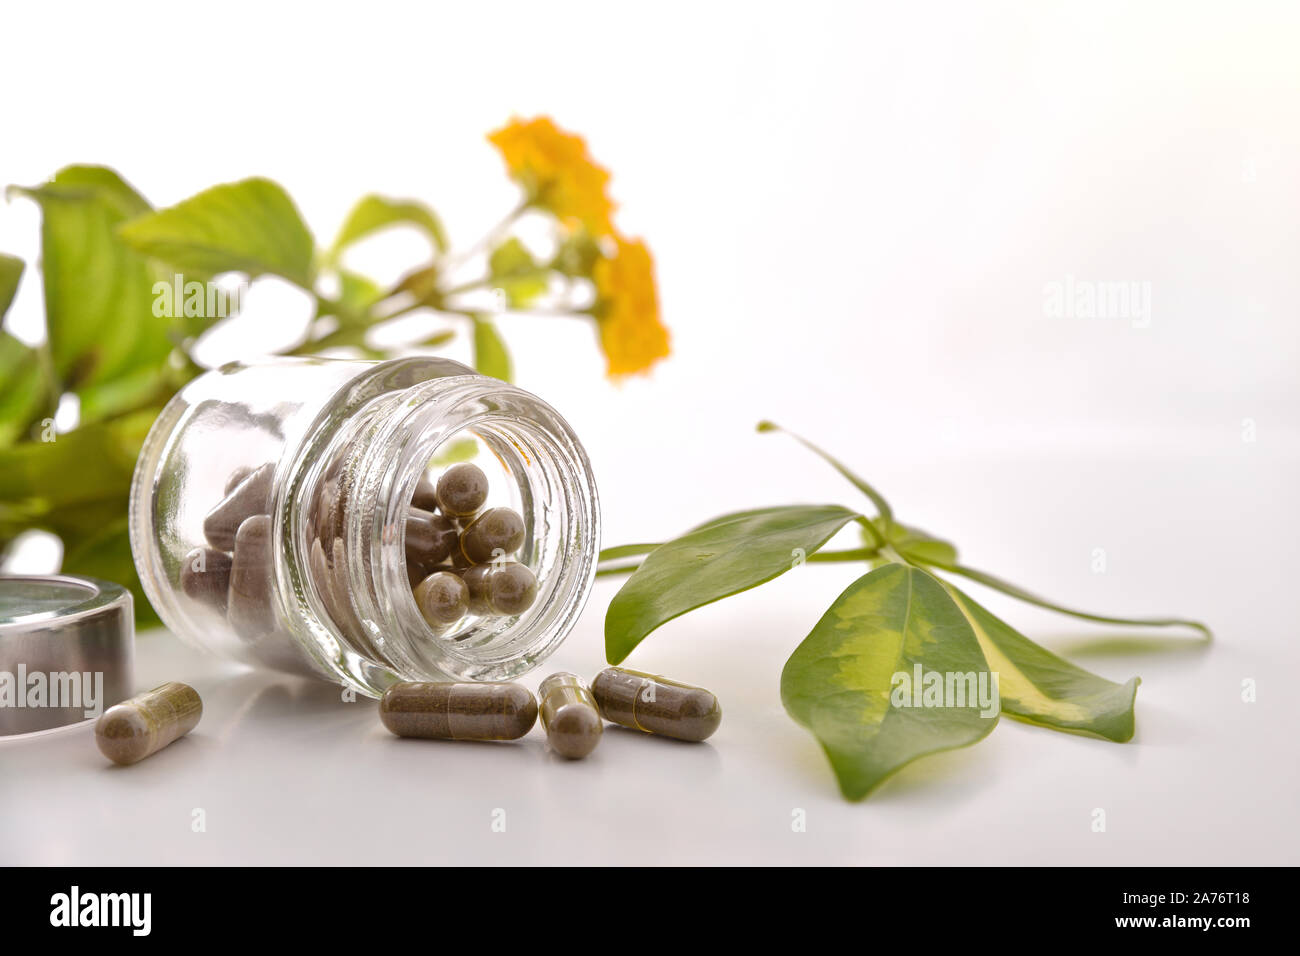 Natural medicine capsules in open glass jar lying on white table with aloe vera and plant leaves. Natural medicine concept. Front view. Horizontal com Stock Photo